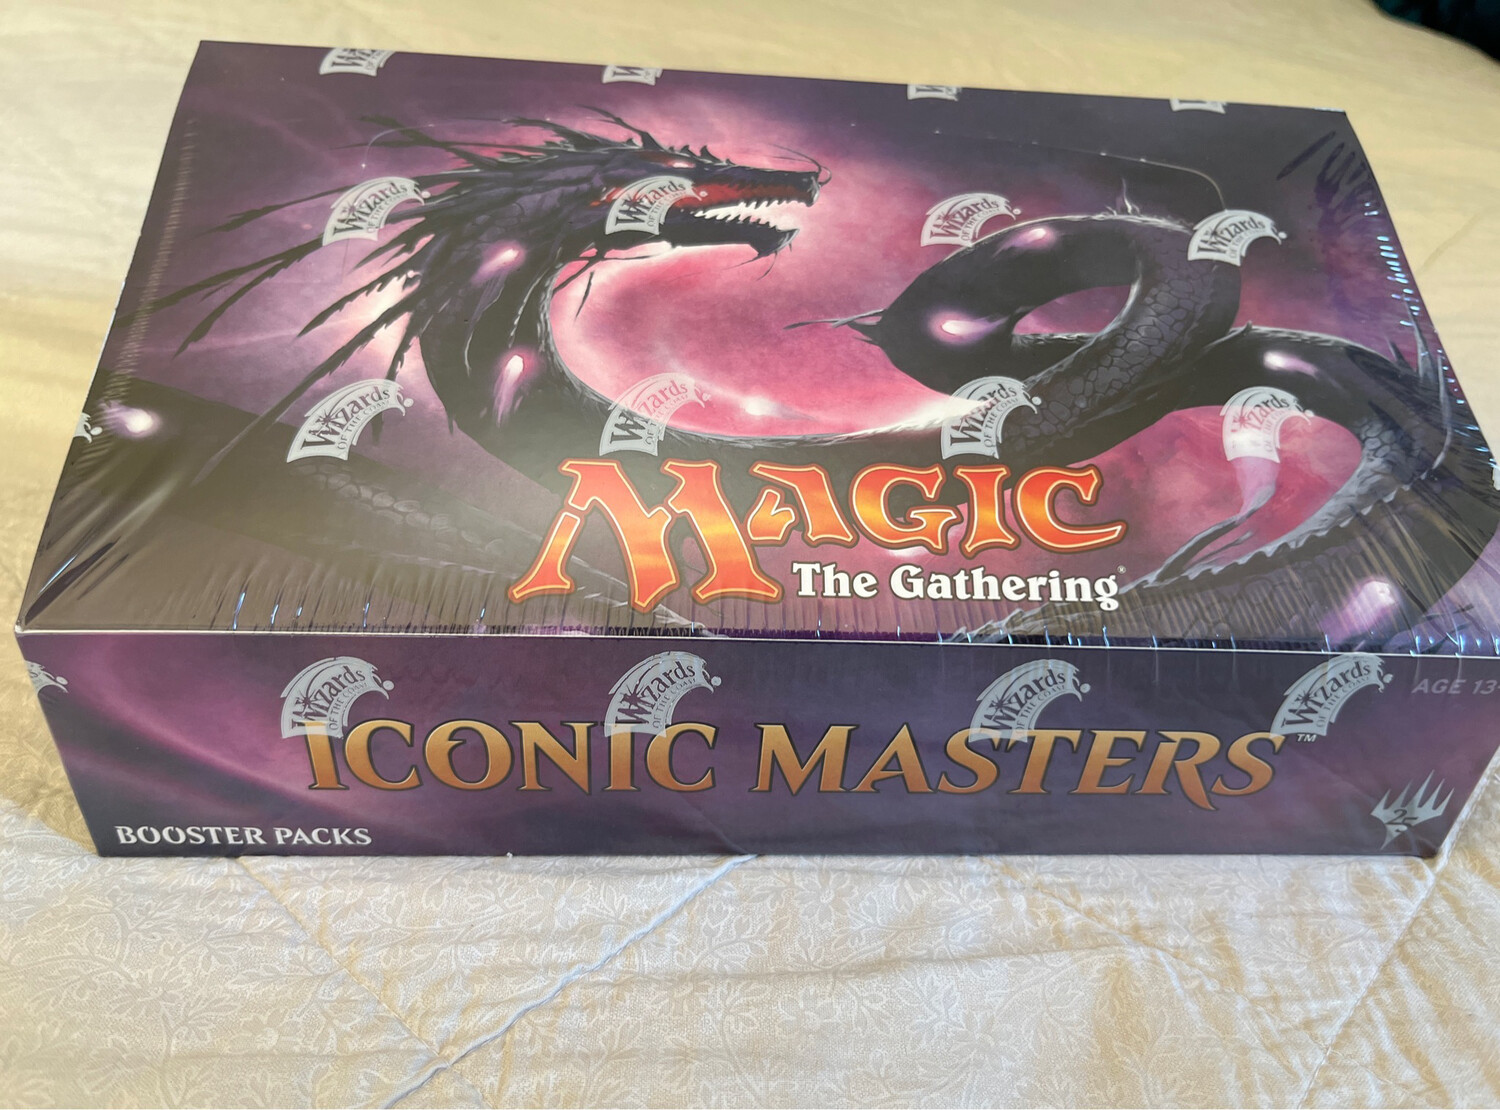 Iconic Masters Booster Display